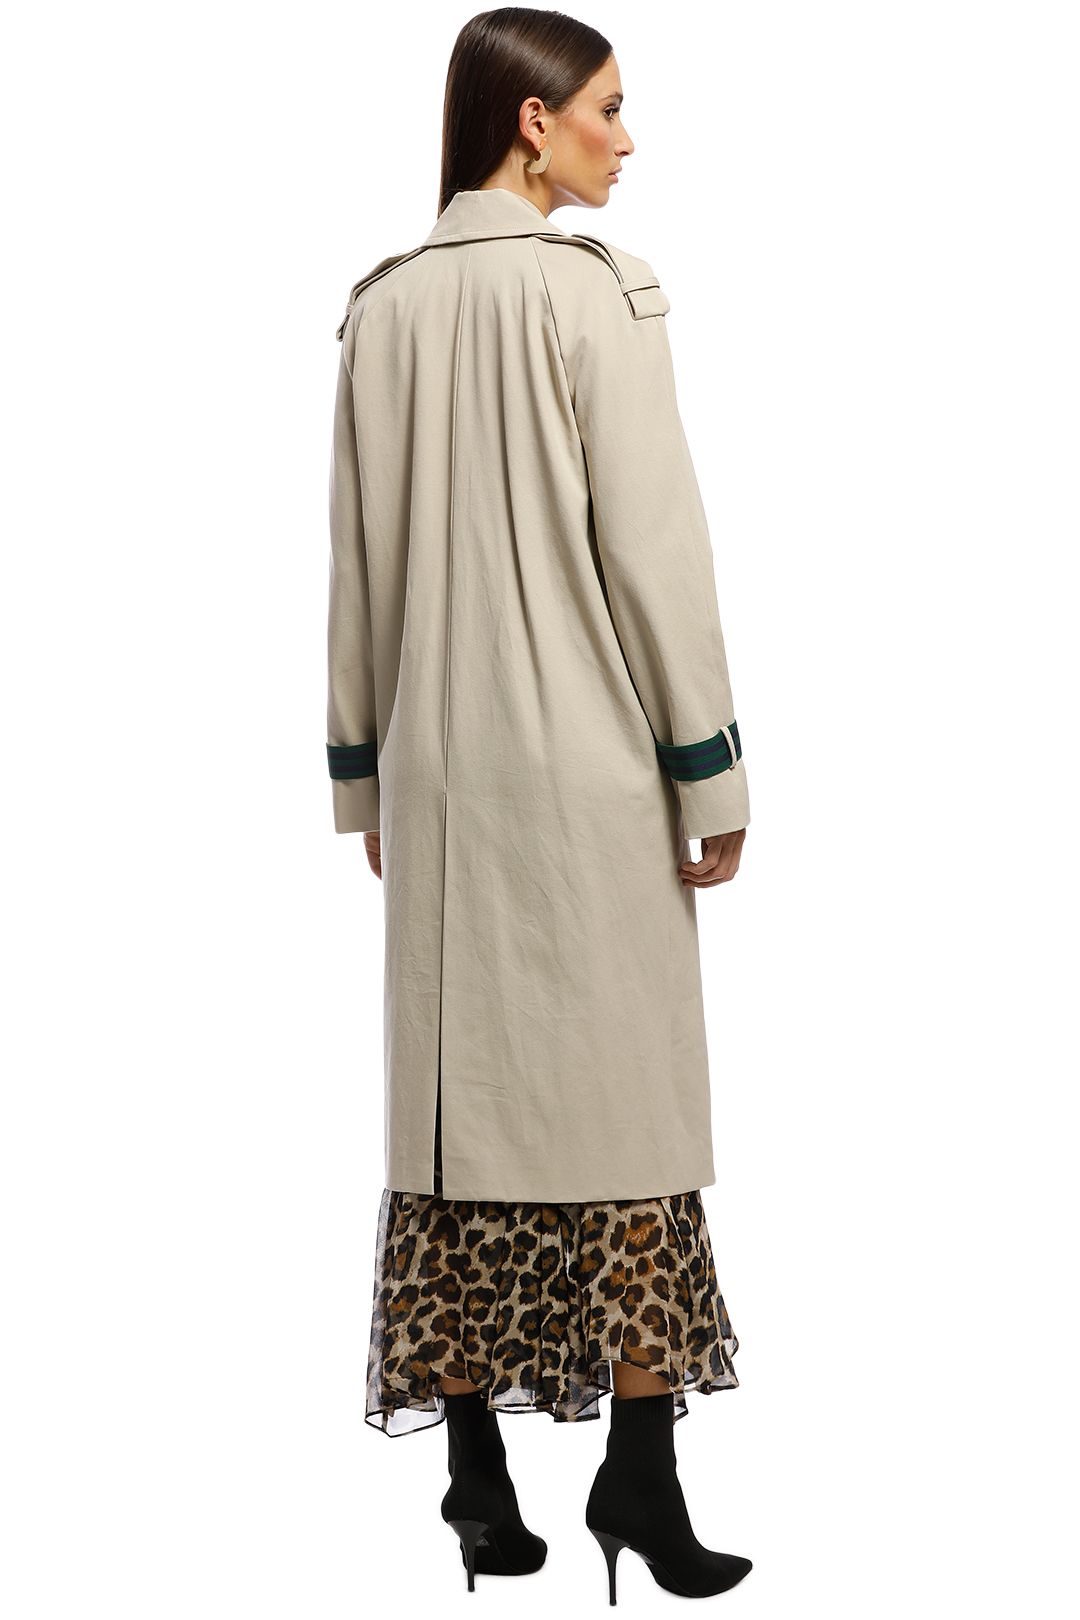 AKIN by Ginger & Smart - Breeze Trench - Taupe - Back